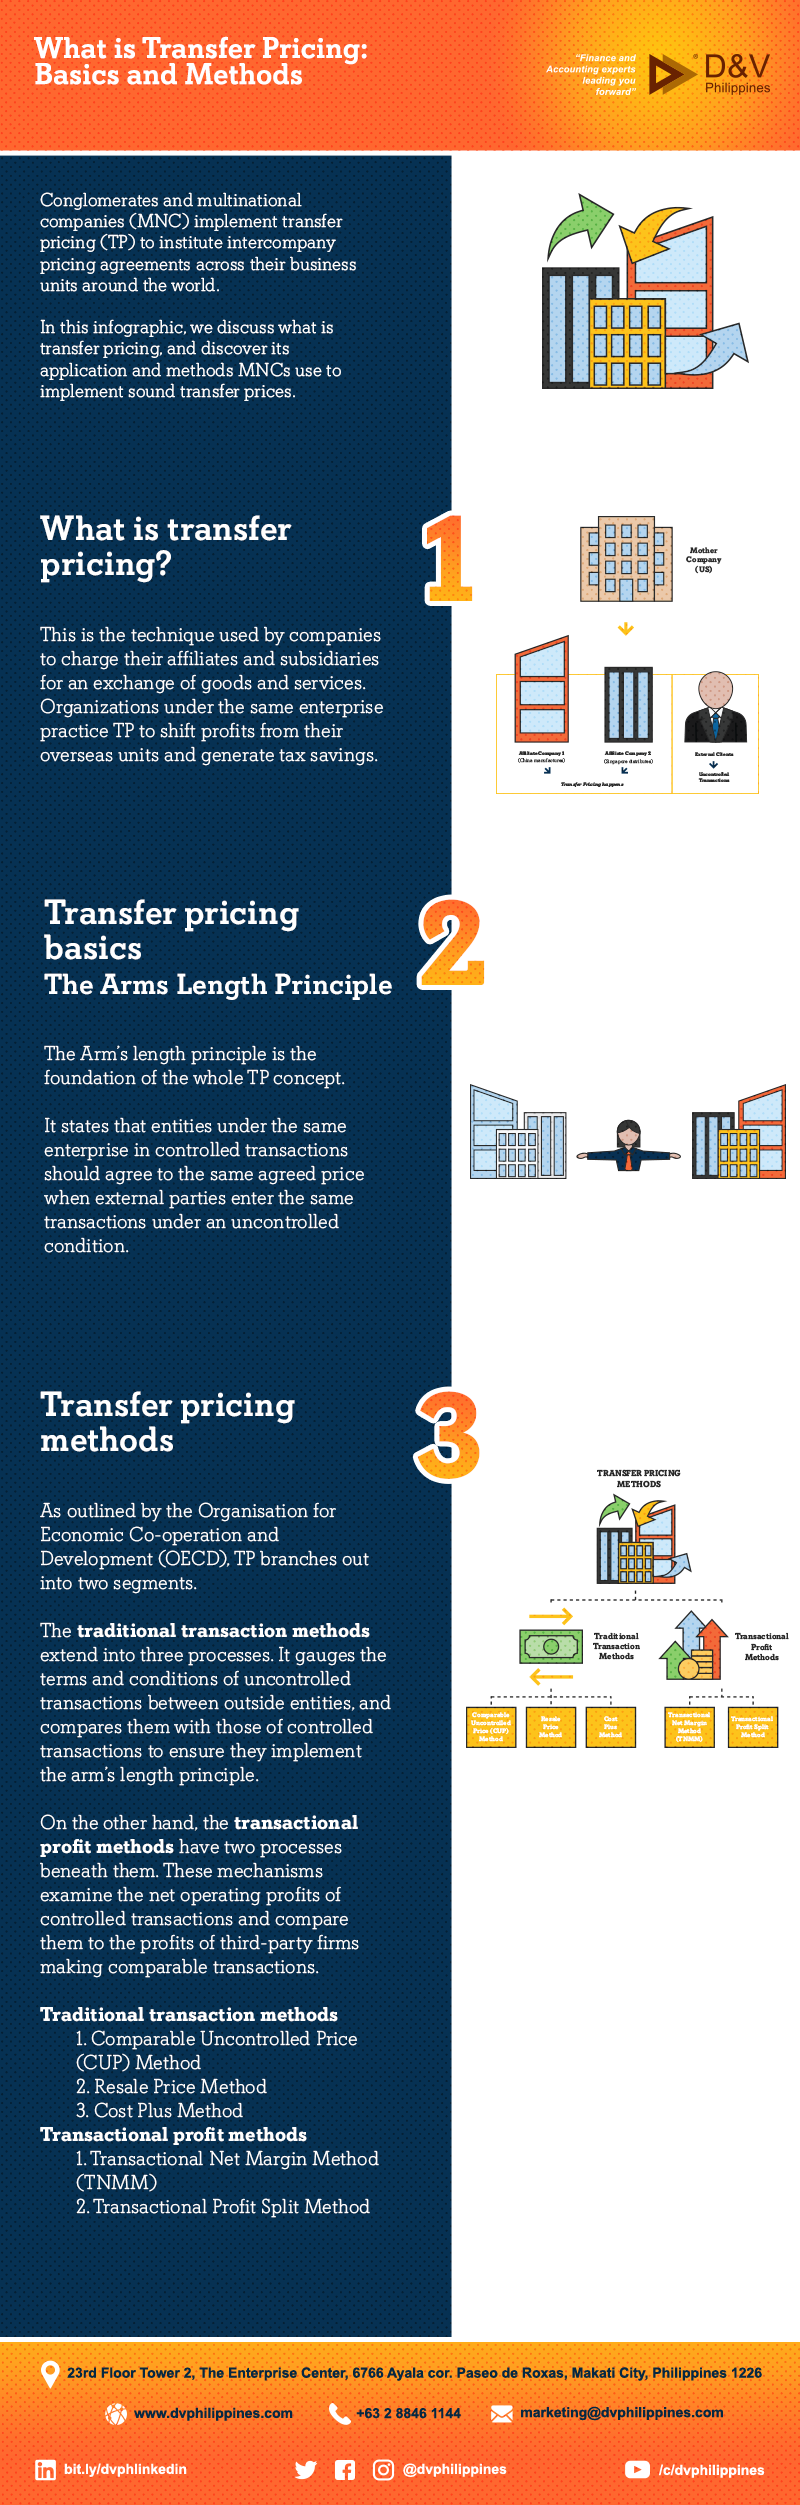 Infog_W_C_Title_What-is-Transfer-Pricing-Basics-and-MethodsMain